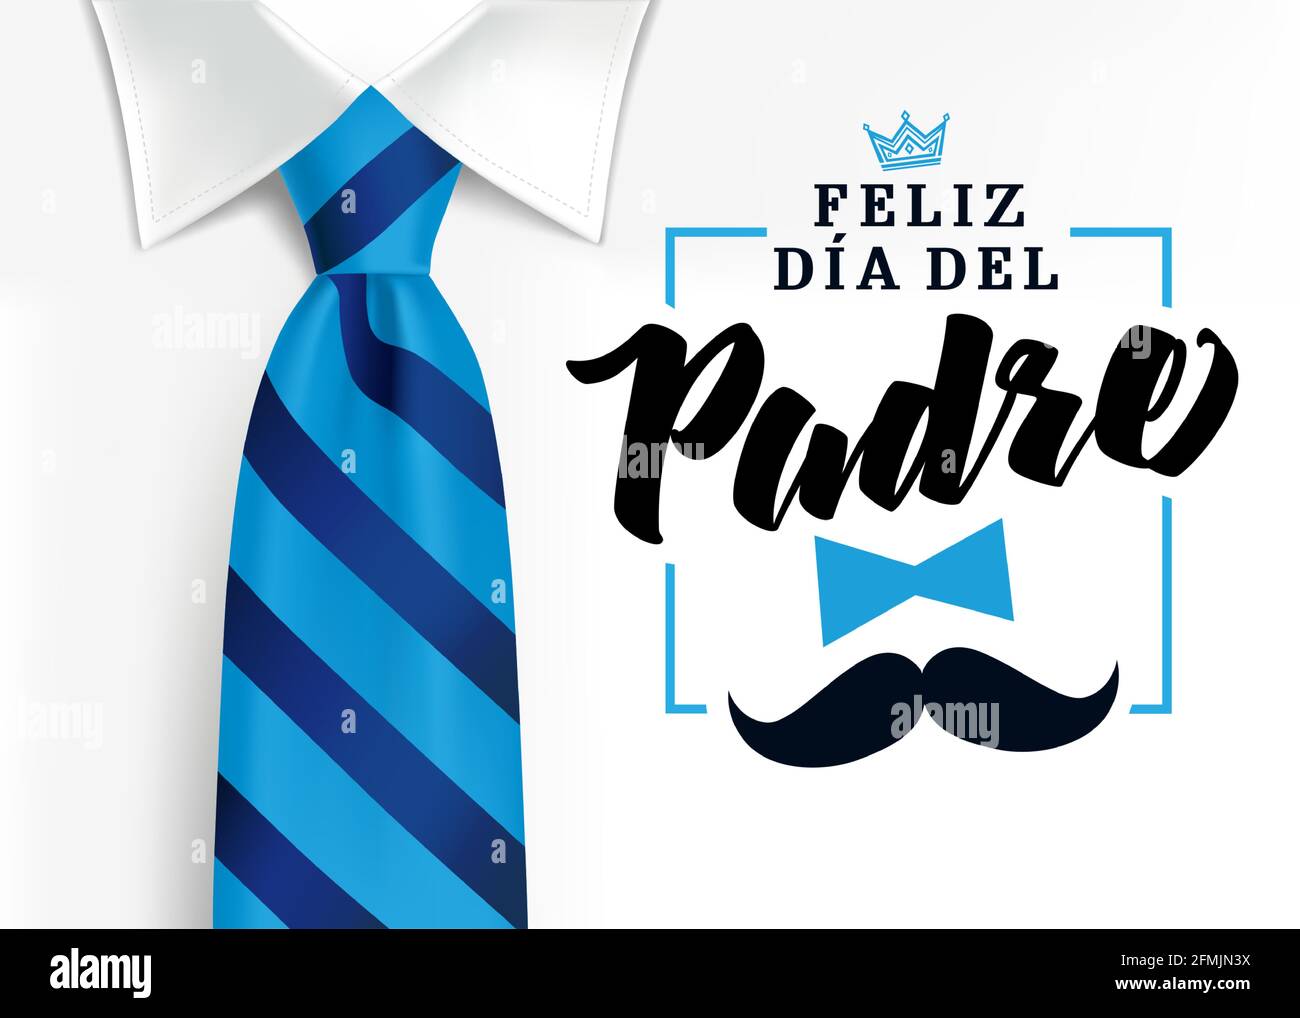 Feliz dia del padre spanish elegant lettering, translate - Happy fathers day. Father day vector illustration with text, crown and mustache. Congratula Stock Vector